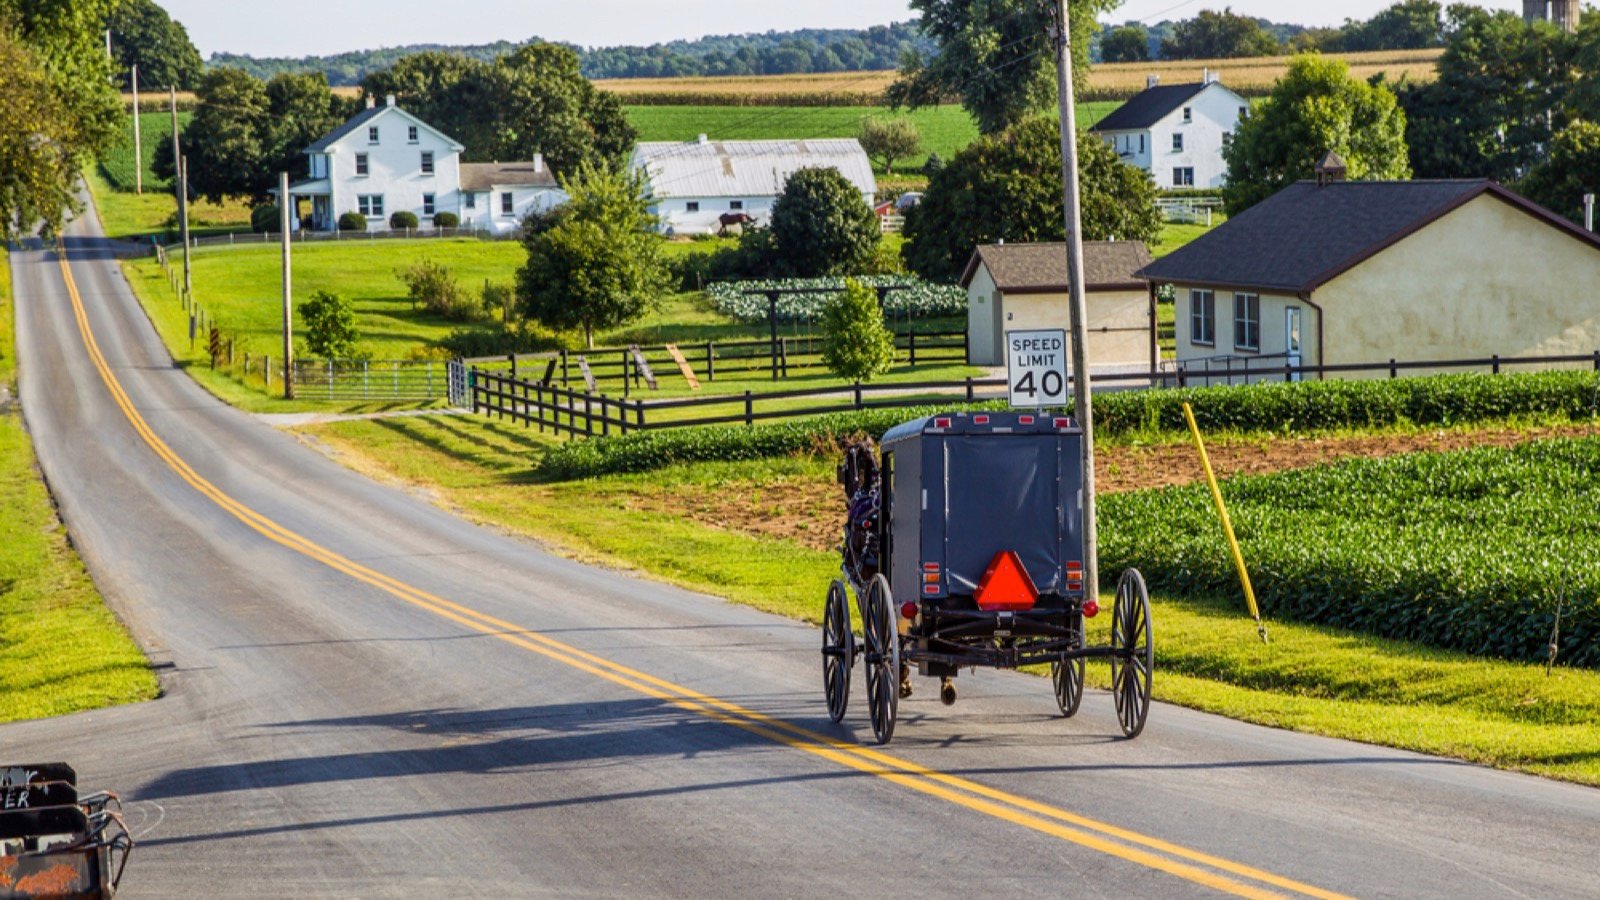 <p>I still can’t wrap my head around the Amish way of life. Lancaster, Pennsylvania, is home to thousands of people who live without electricity and ride in horse-drawn buggies and carriages. Visiting the town (and being mindful and respectful of the residents’ culture) is like traveling back in time. It’s worth the trip just to see the confused looks on your kids’ faces as they try to understand what they’re seeing. In addition, I maintain that the Amish make the best donuts in the world, so that’s another reason to head to Lancaster.</p>